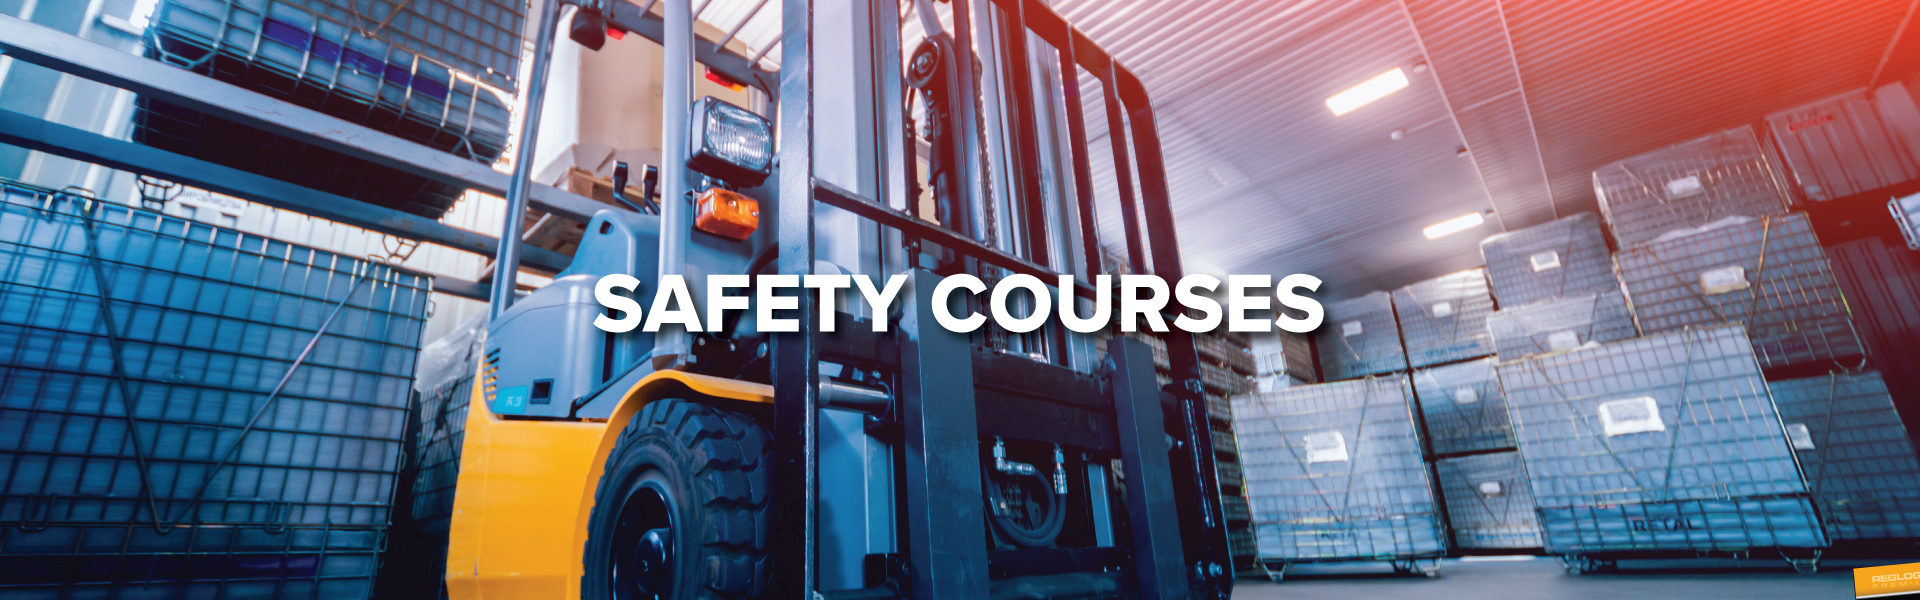 Safety-Courses-Header_1920x600